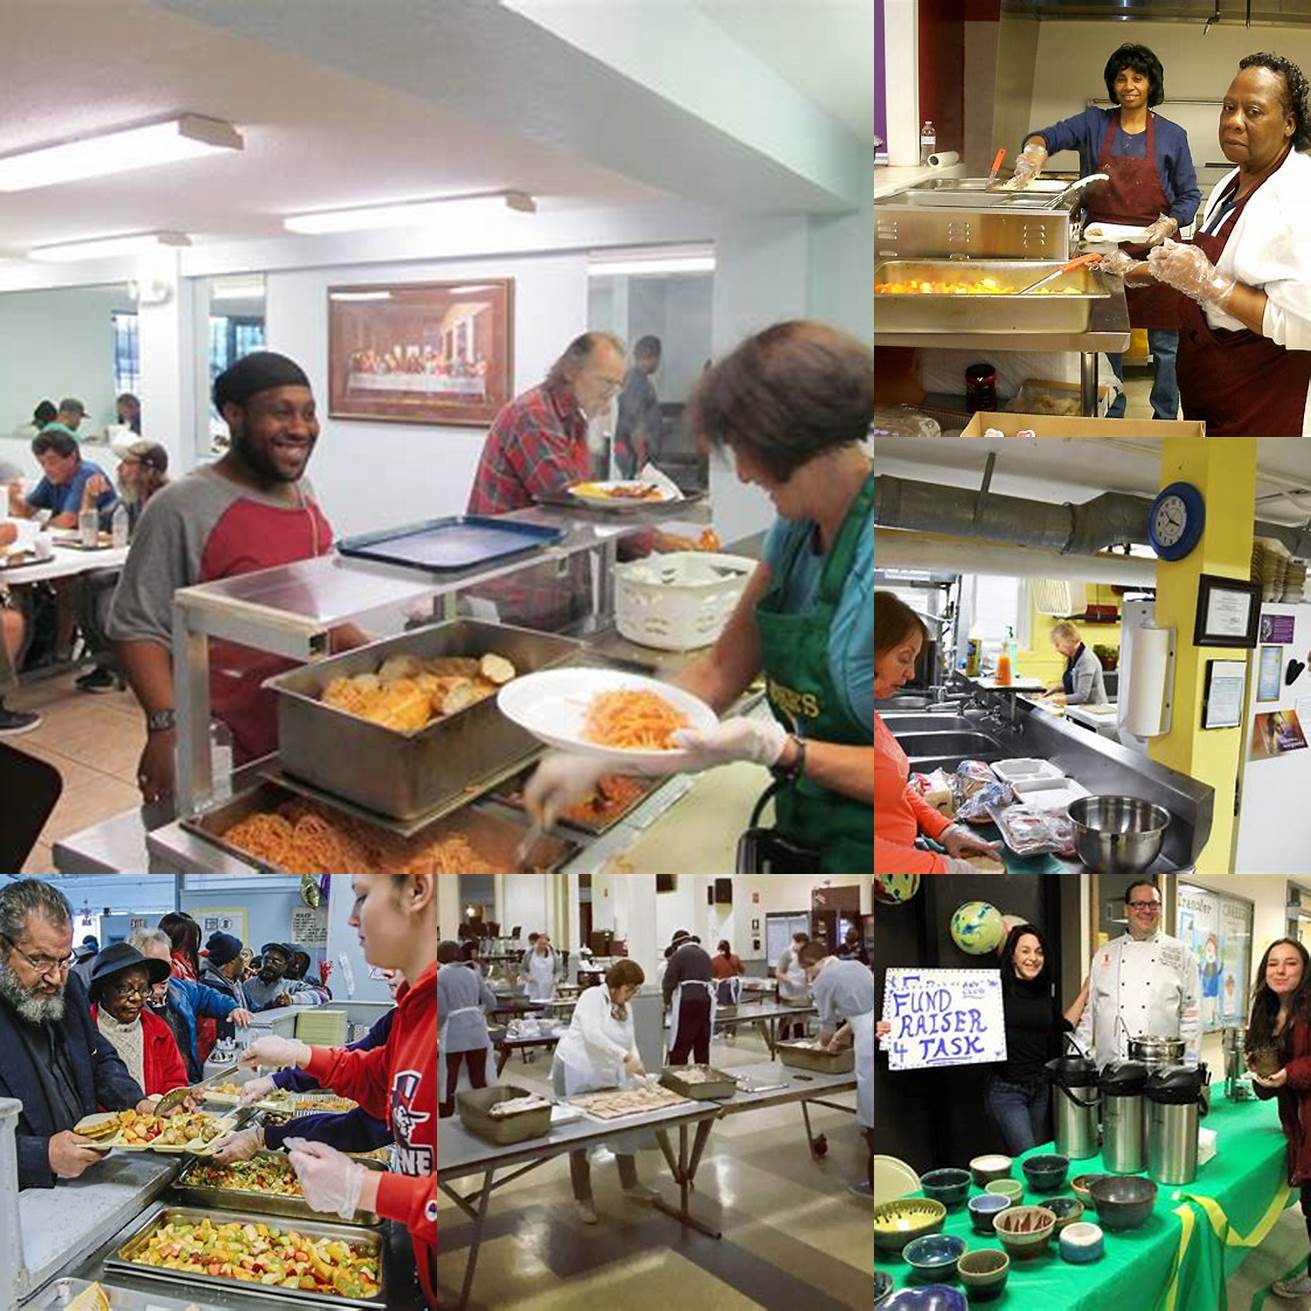 Research soup kitchens in your area and find one that aligns with your values and interests